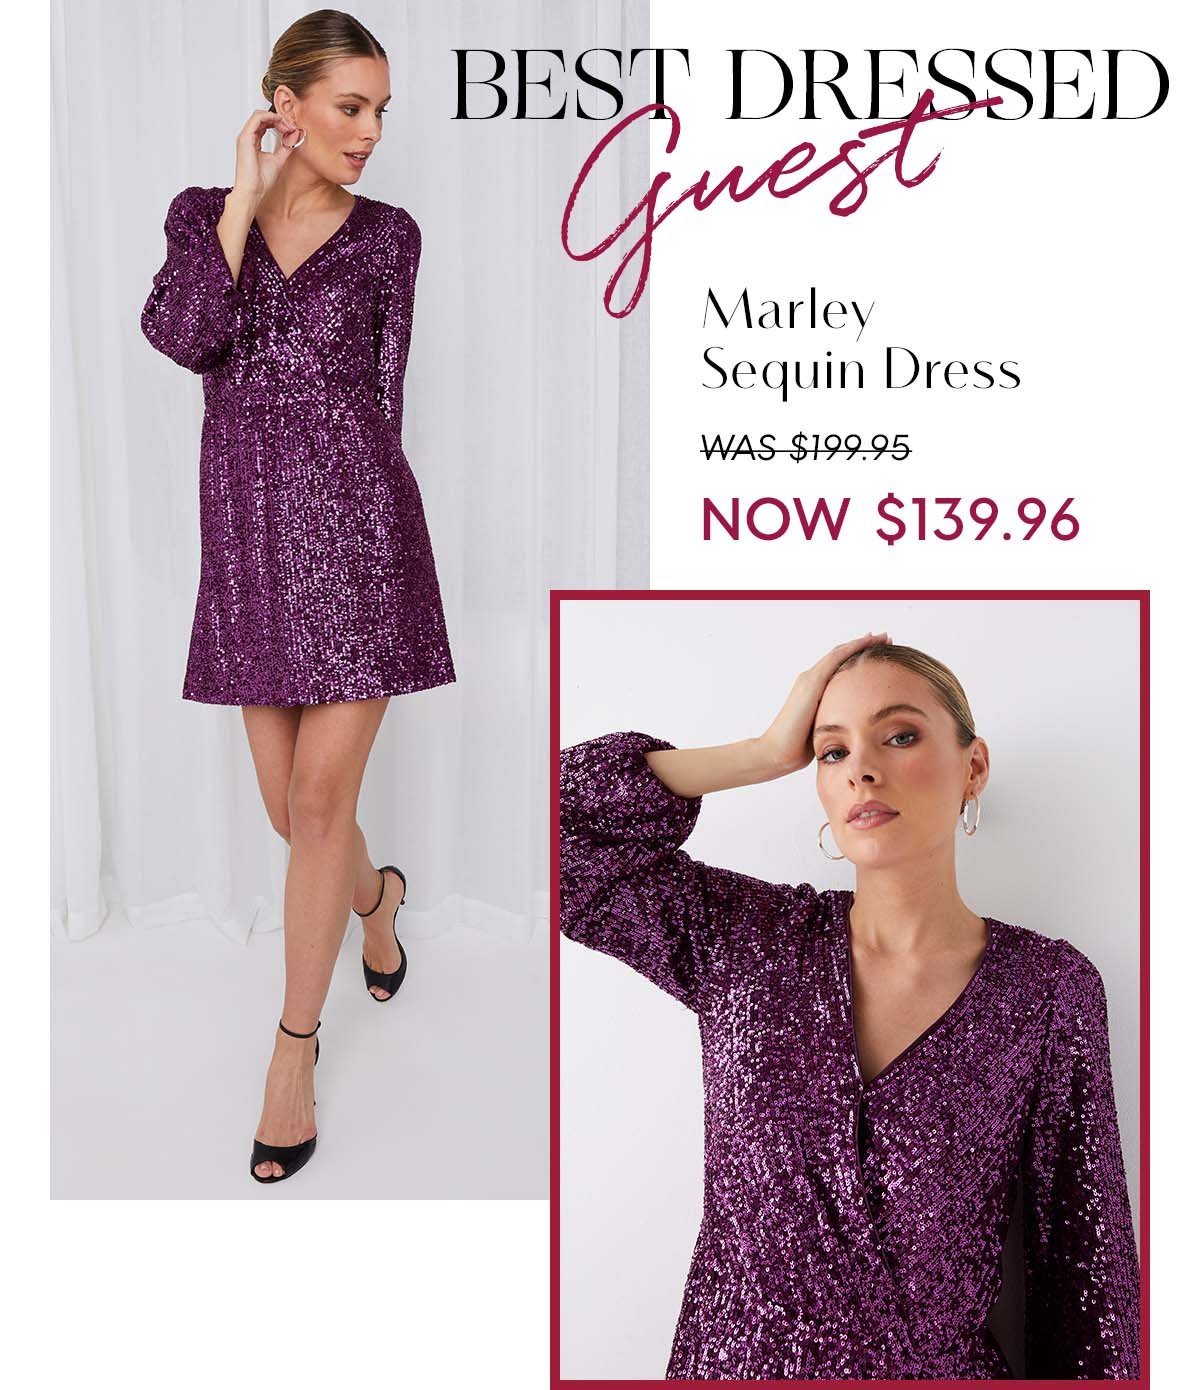 Best Dressed Guest. Marley Sequin Dress WAS $199.95 NOW $139.96